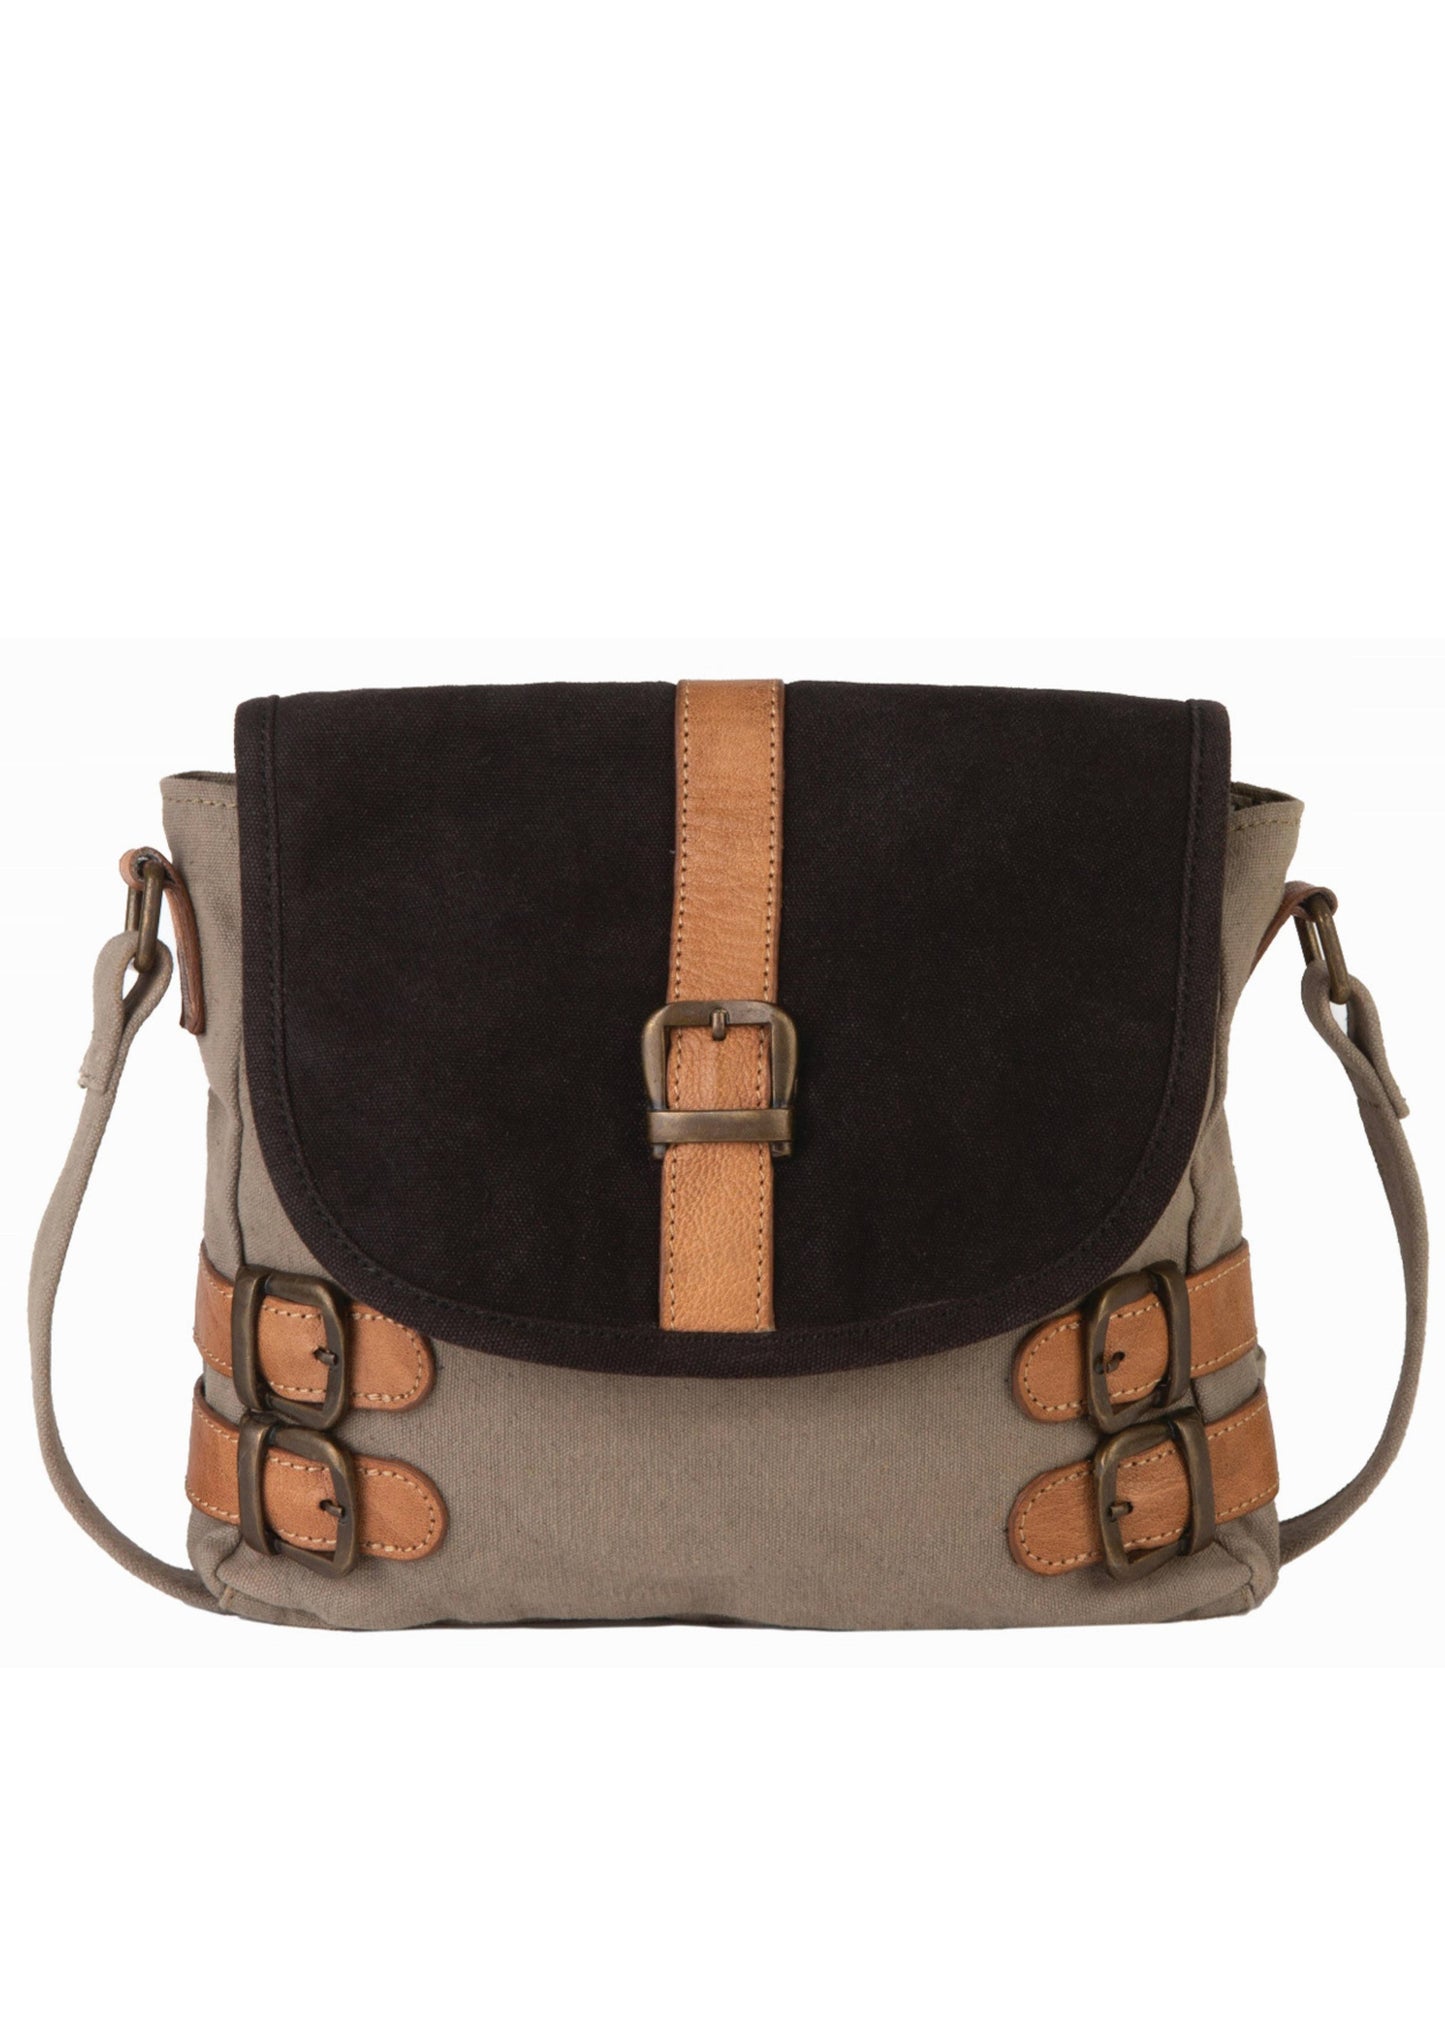 Buckled Up Up-Cycled Canvas Crossbody, M-5306